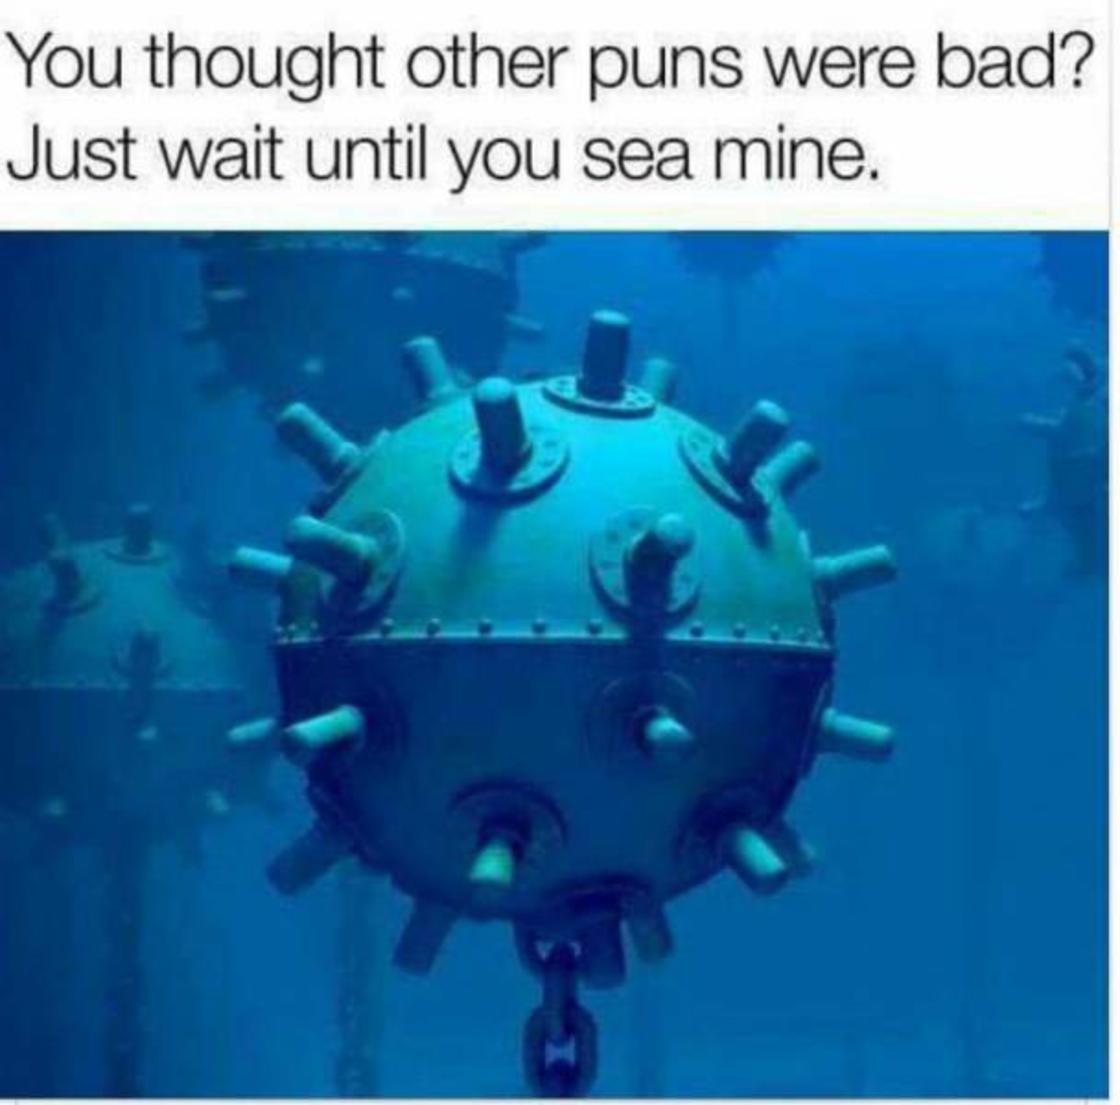 you thought your puns were bad wait till you sea mine - You thought other puns were bad? Just wait until you sea mine.